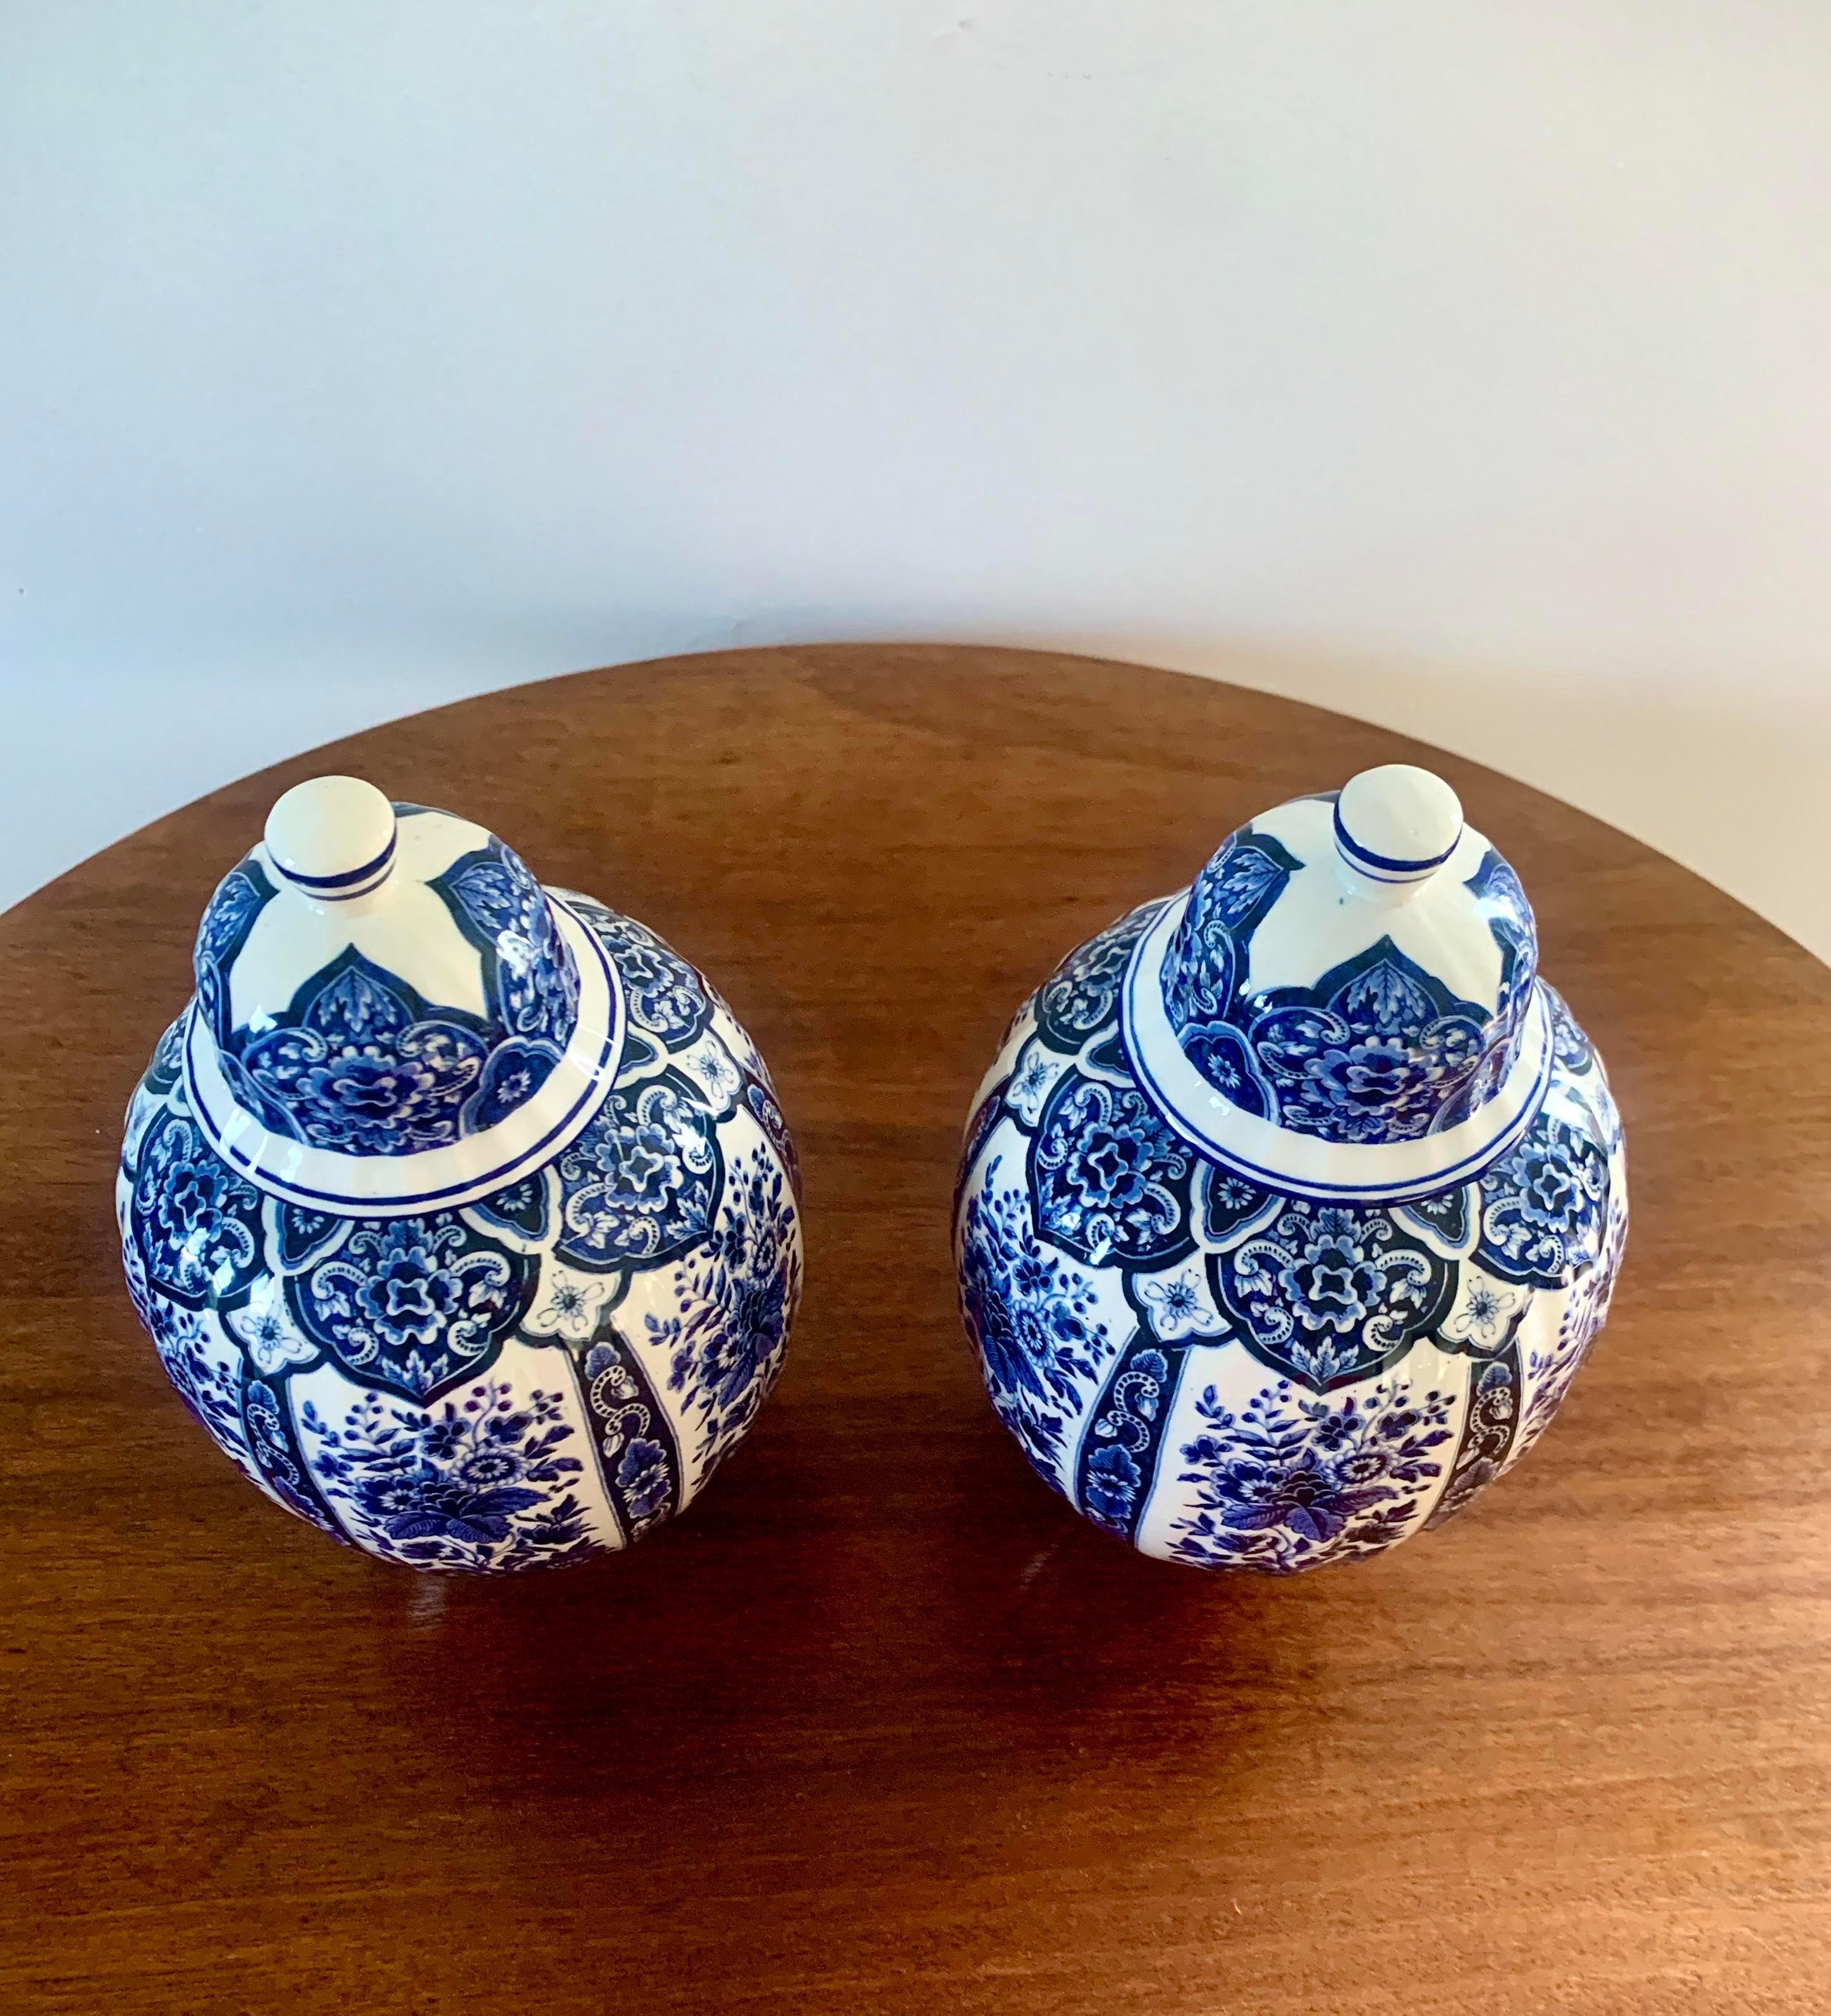 20th Century Italian Blue and White Porcelain Ginger Jars by Ardalt Blue Delfia, Pair